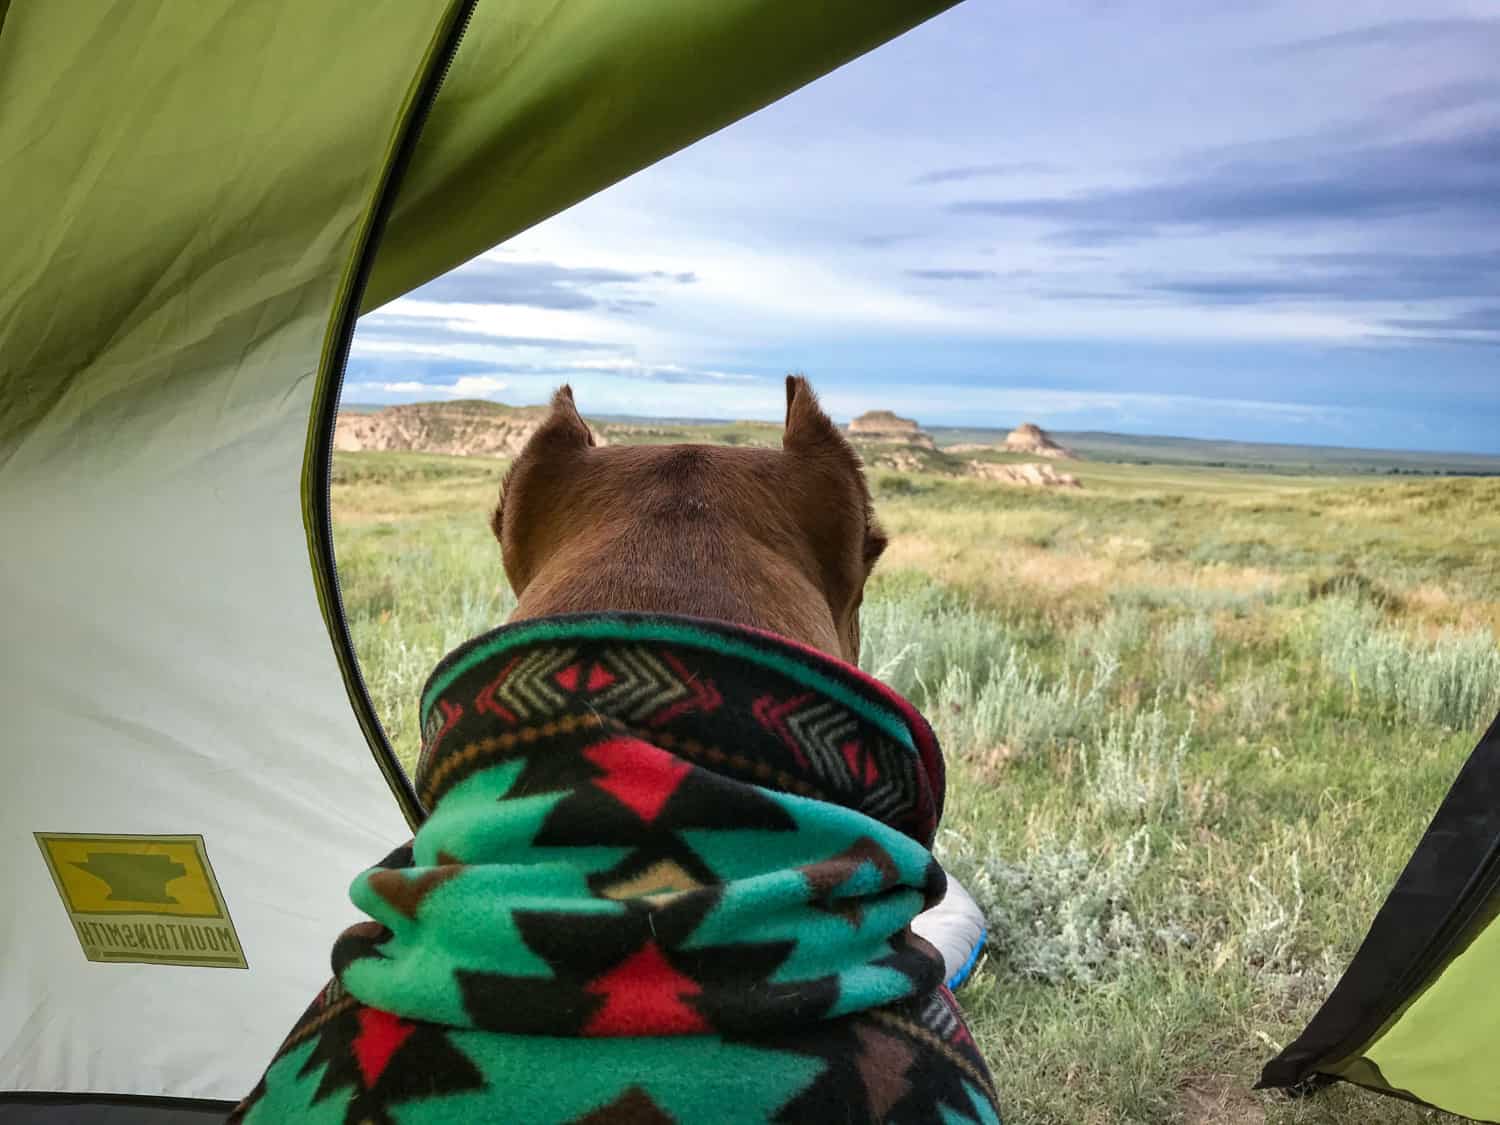 A pitbull dog in a snuggie camping and enjoying a view of the grasslands